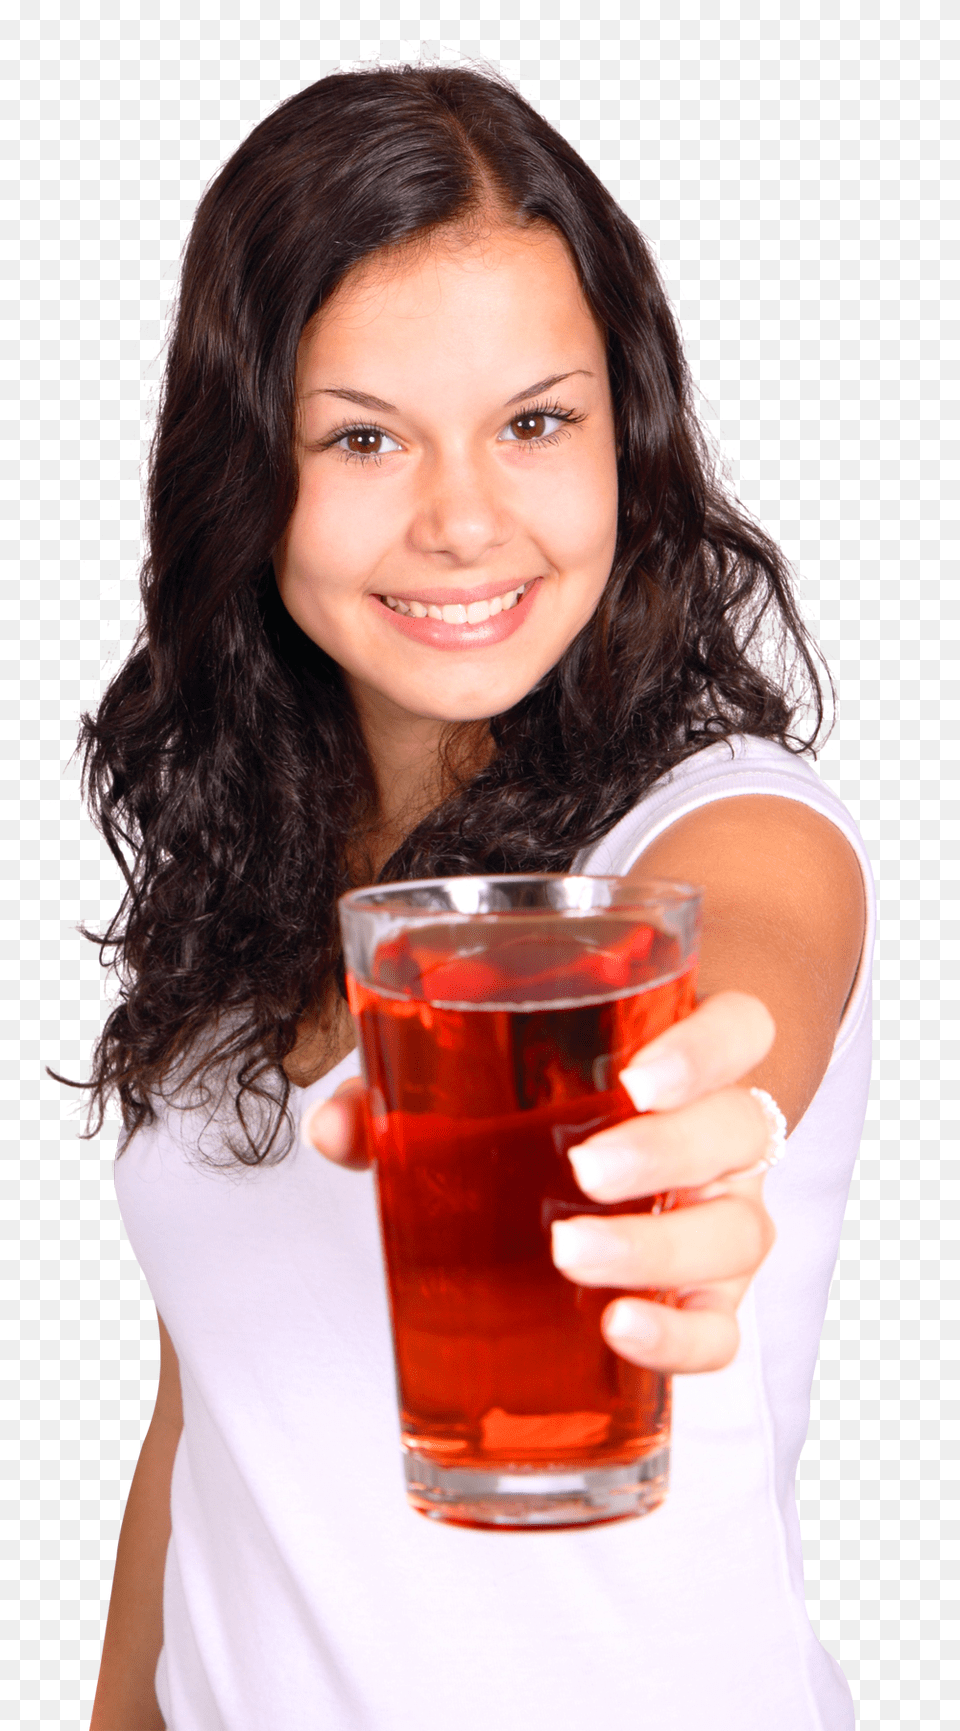 Pngpix Com Young Girl With Glass Of Fresh Juice Image, Alcohol, Beer, Beverage, Soda Free Png Download